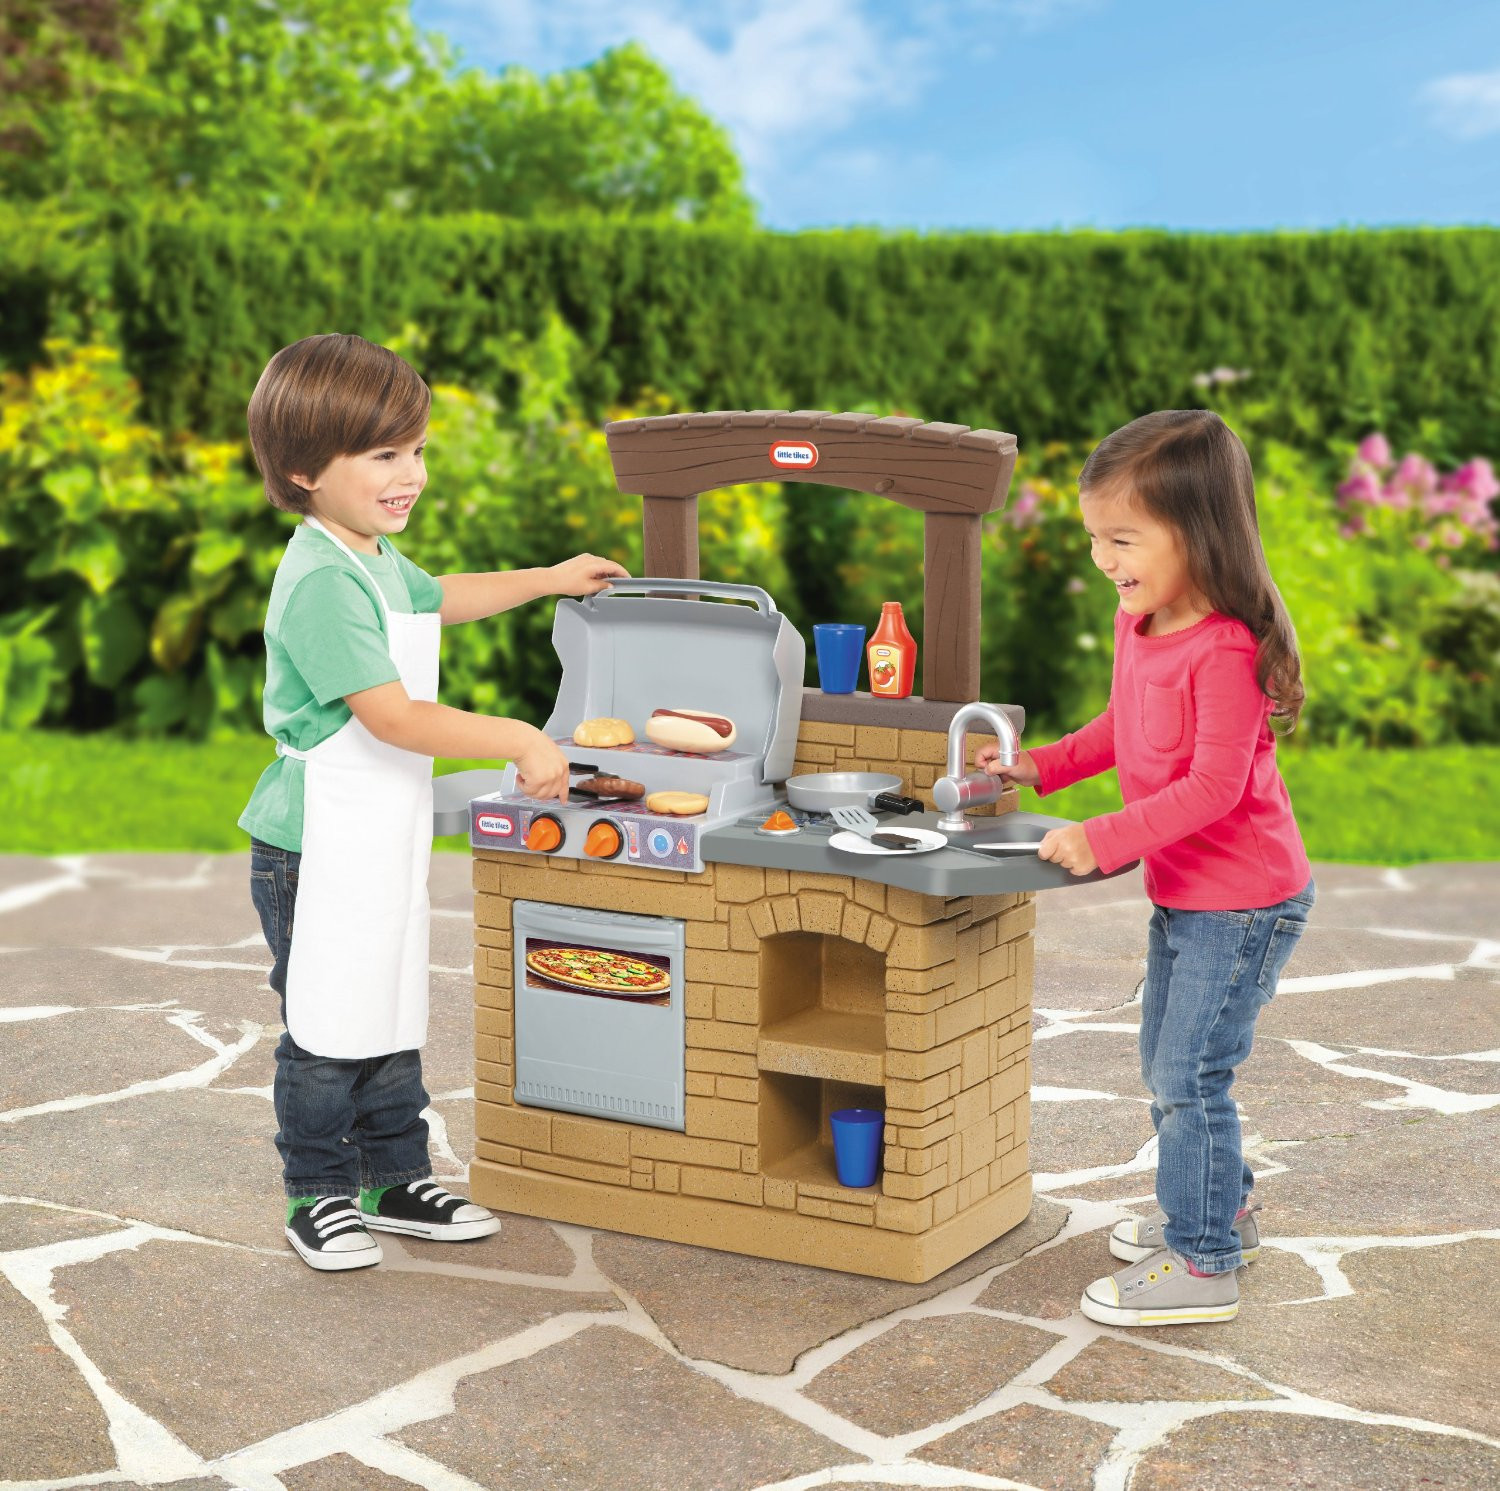 Kids Outdoor Kitchen New Kids Outdoor Play Kitchens and toy Grills